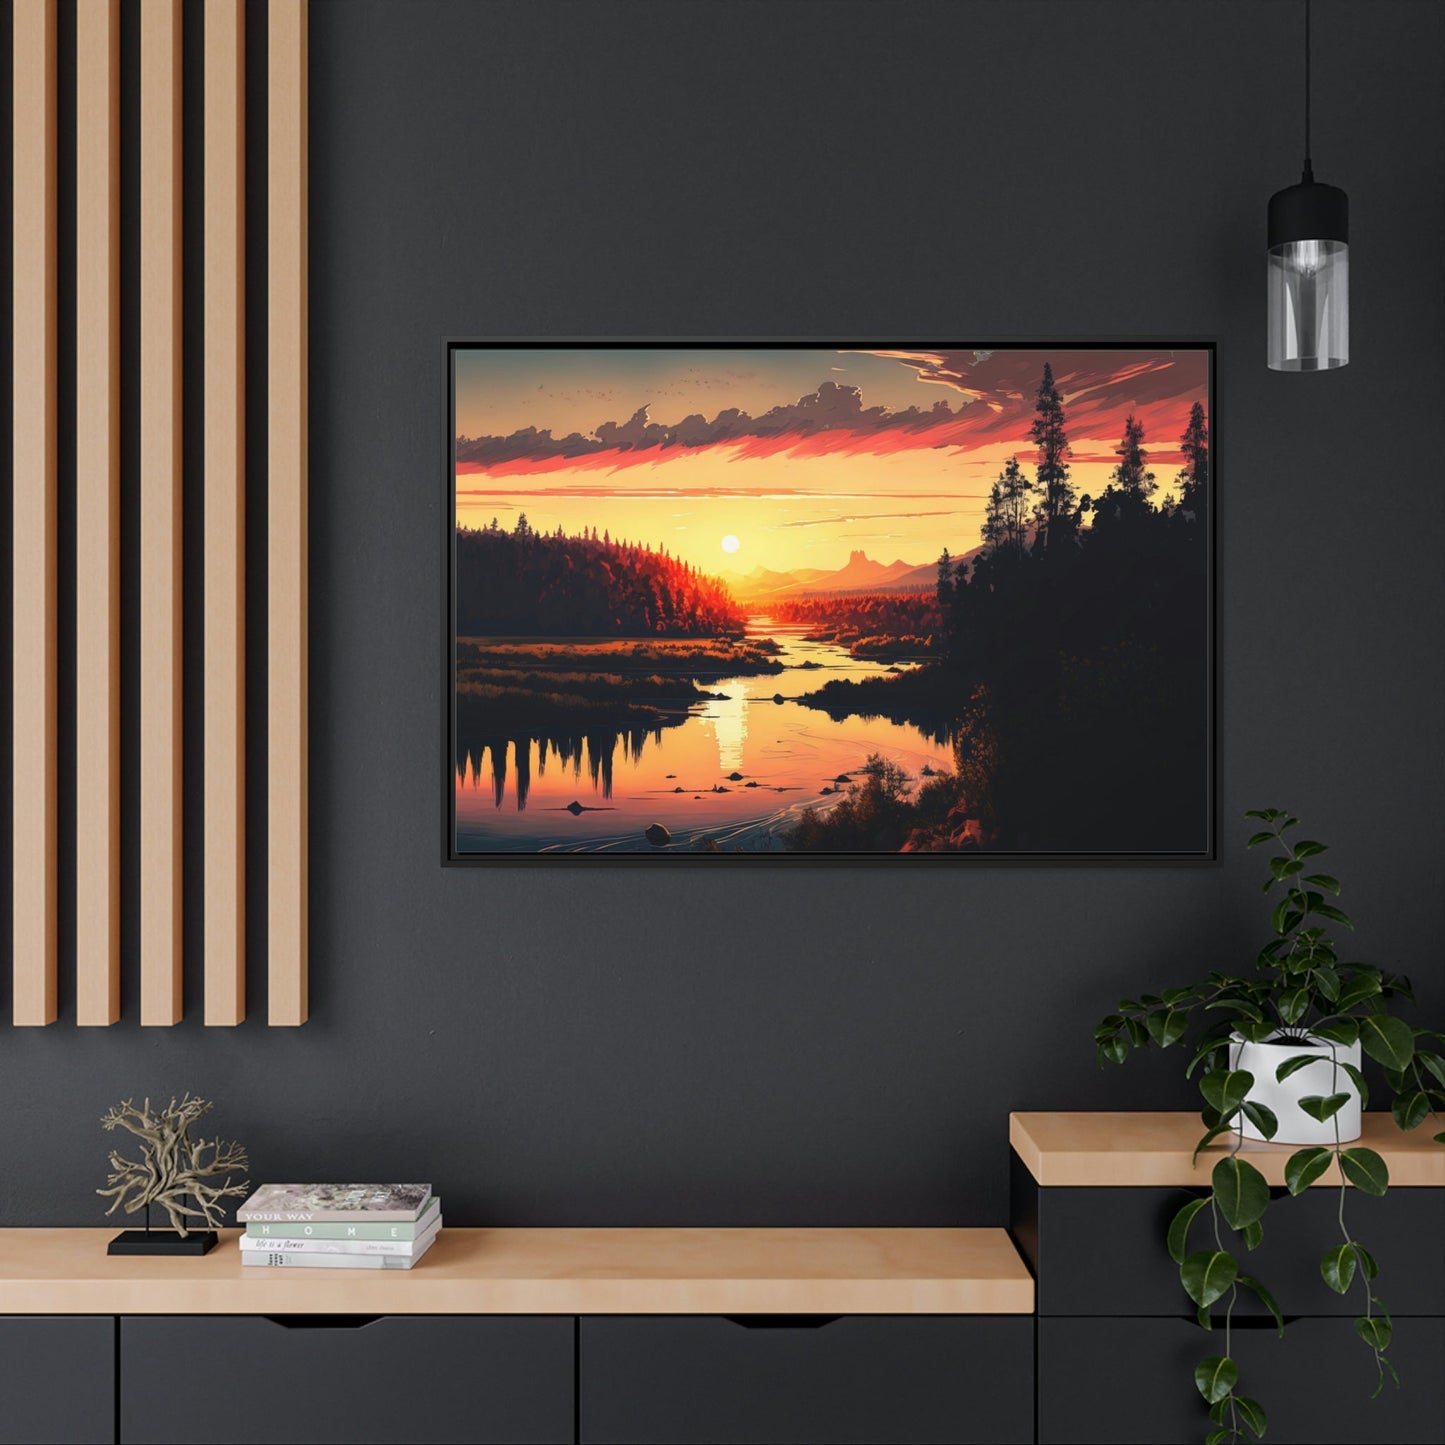 Colors of the River: Natural Canvas Wall Art with Vibrant River Scenery